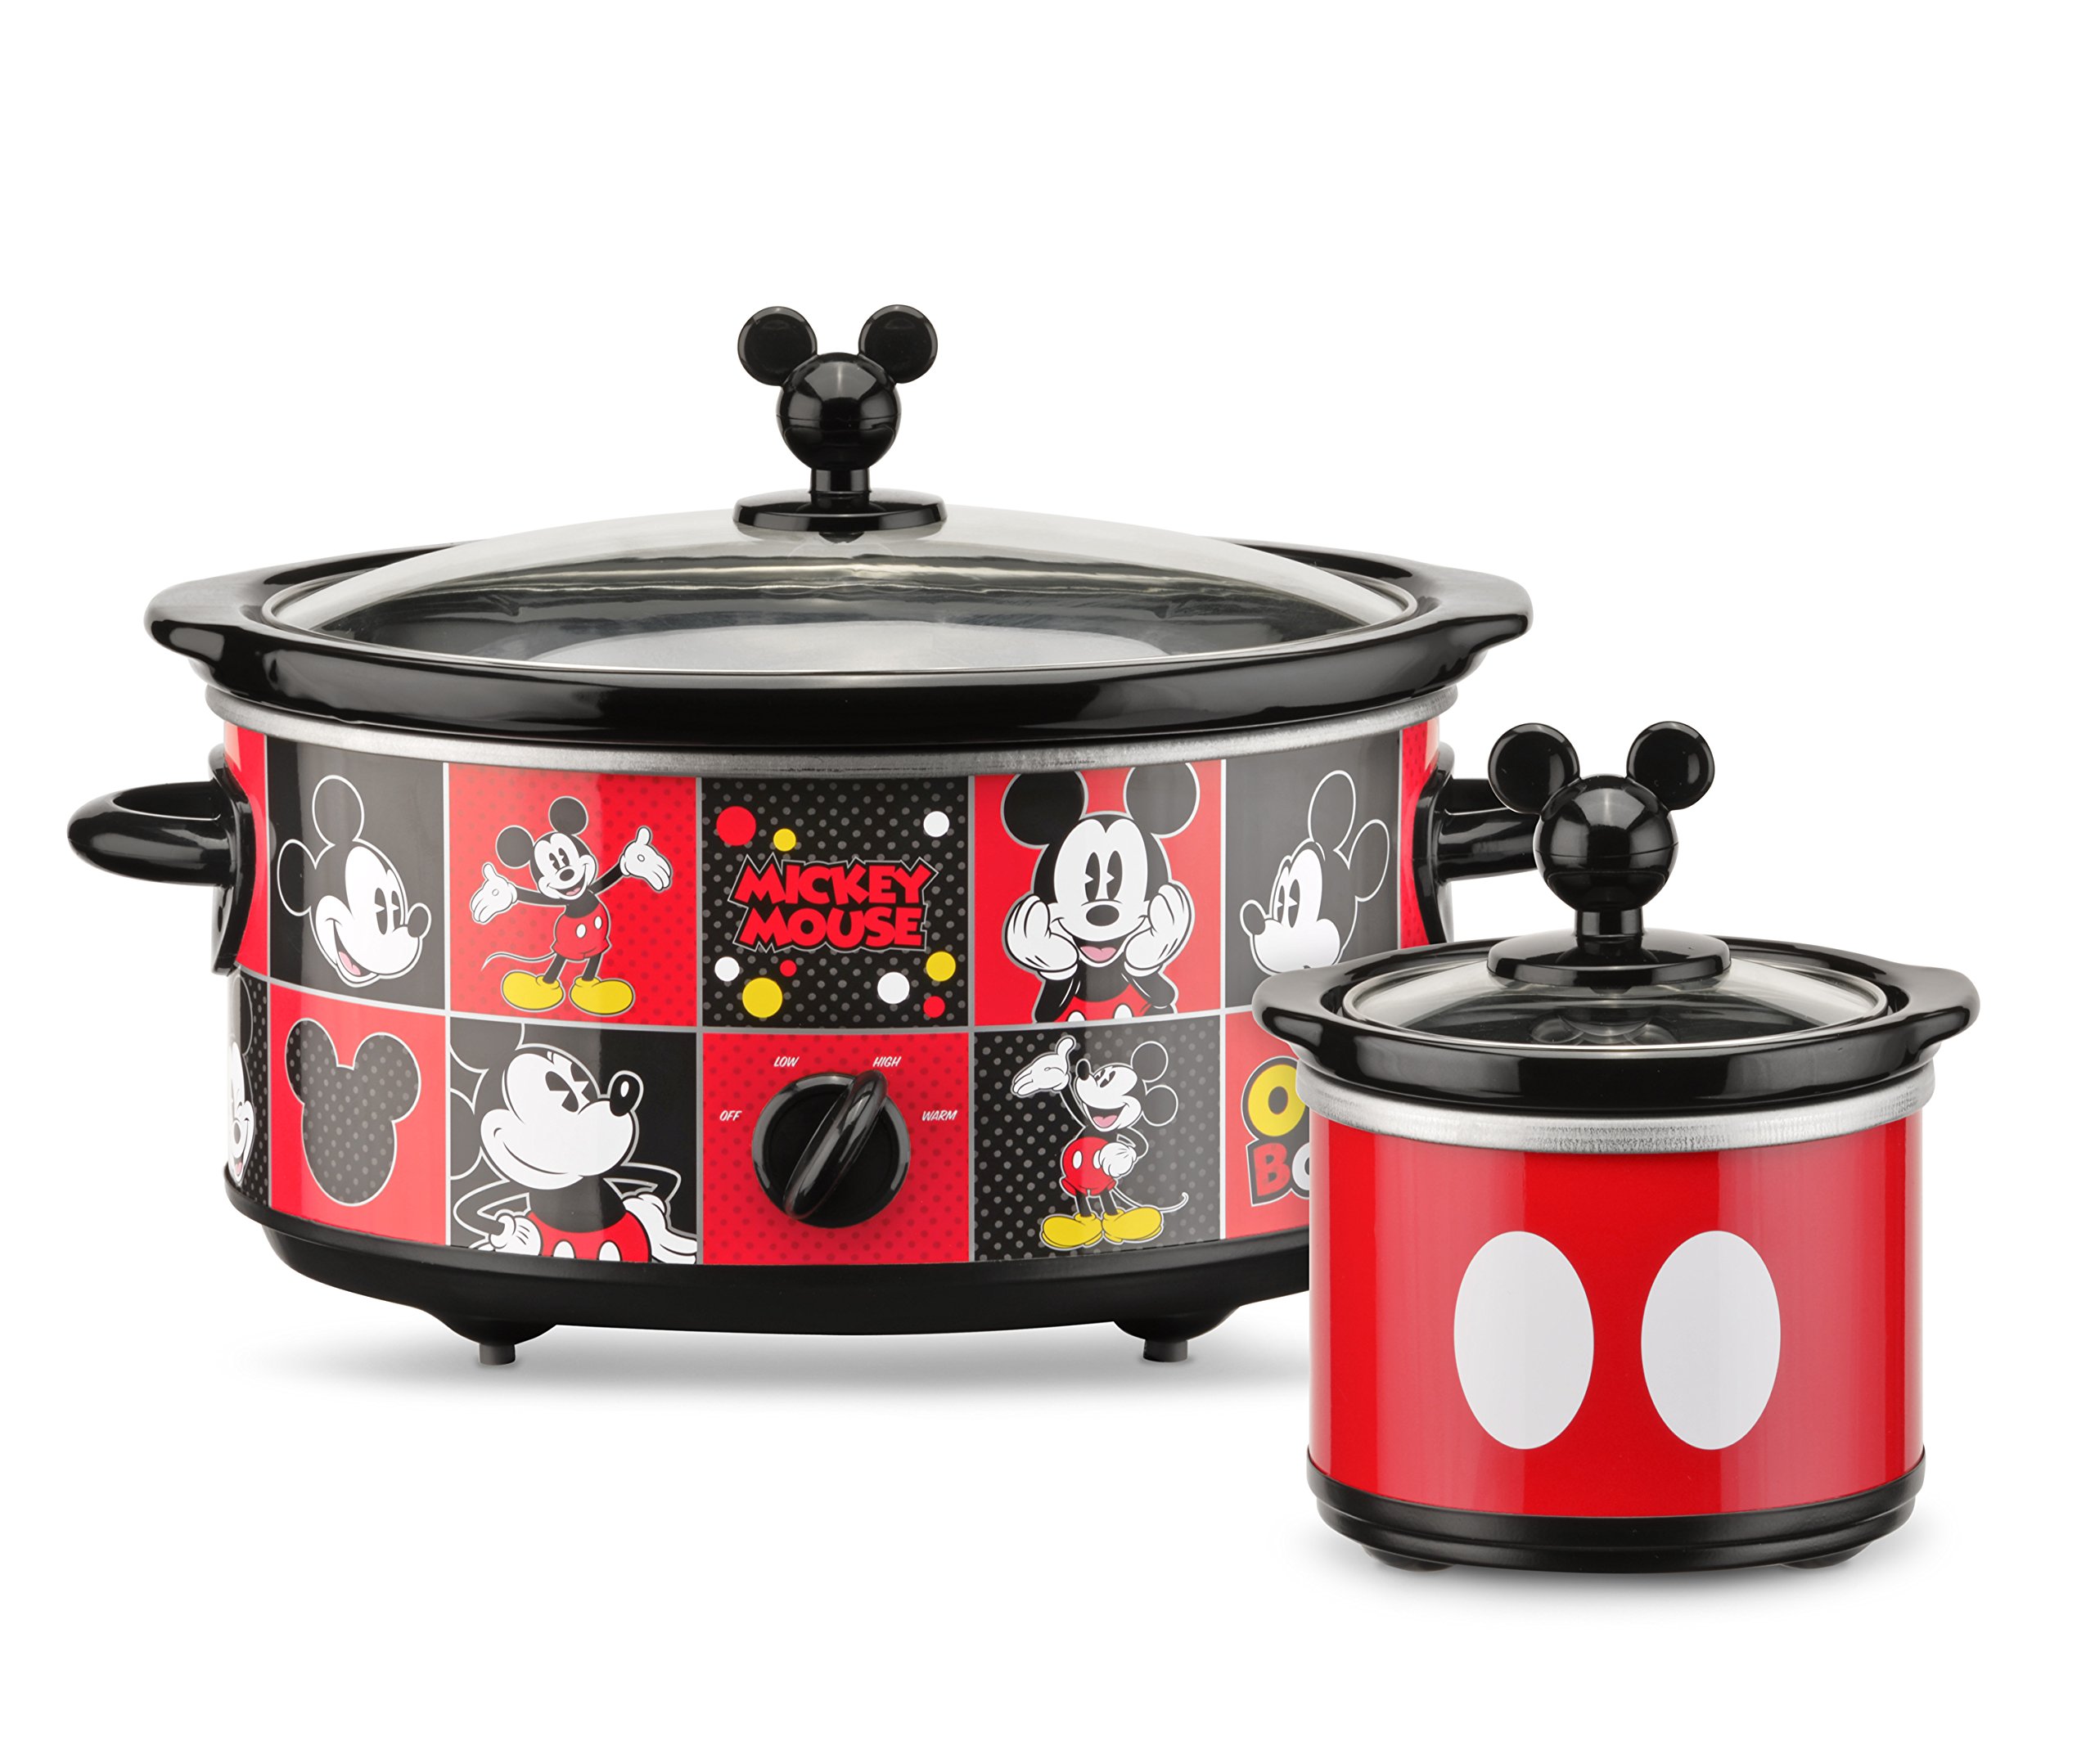 Disney DCM-502 Mickey Mouse Oval Slow Cooker with 20-Ounce Dipper, 5-Quart, Red/Black - image 5 of 5